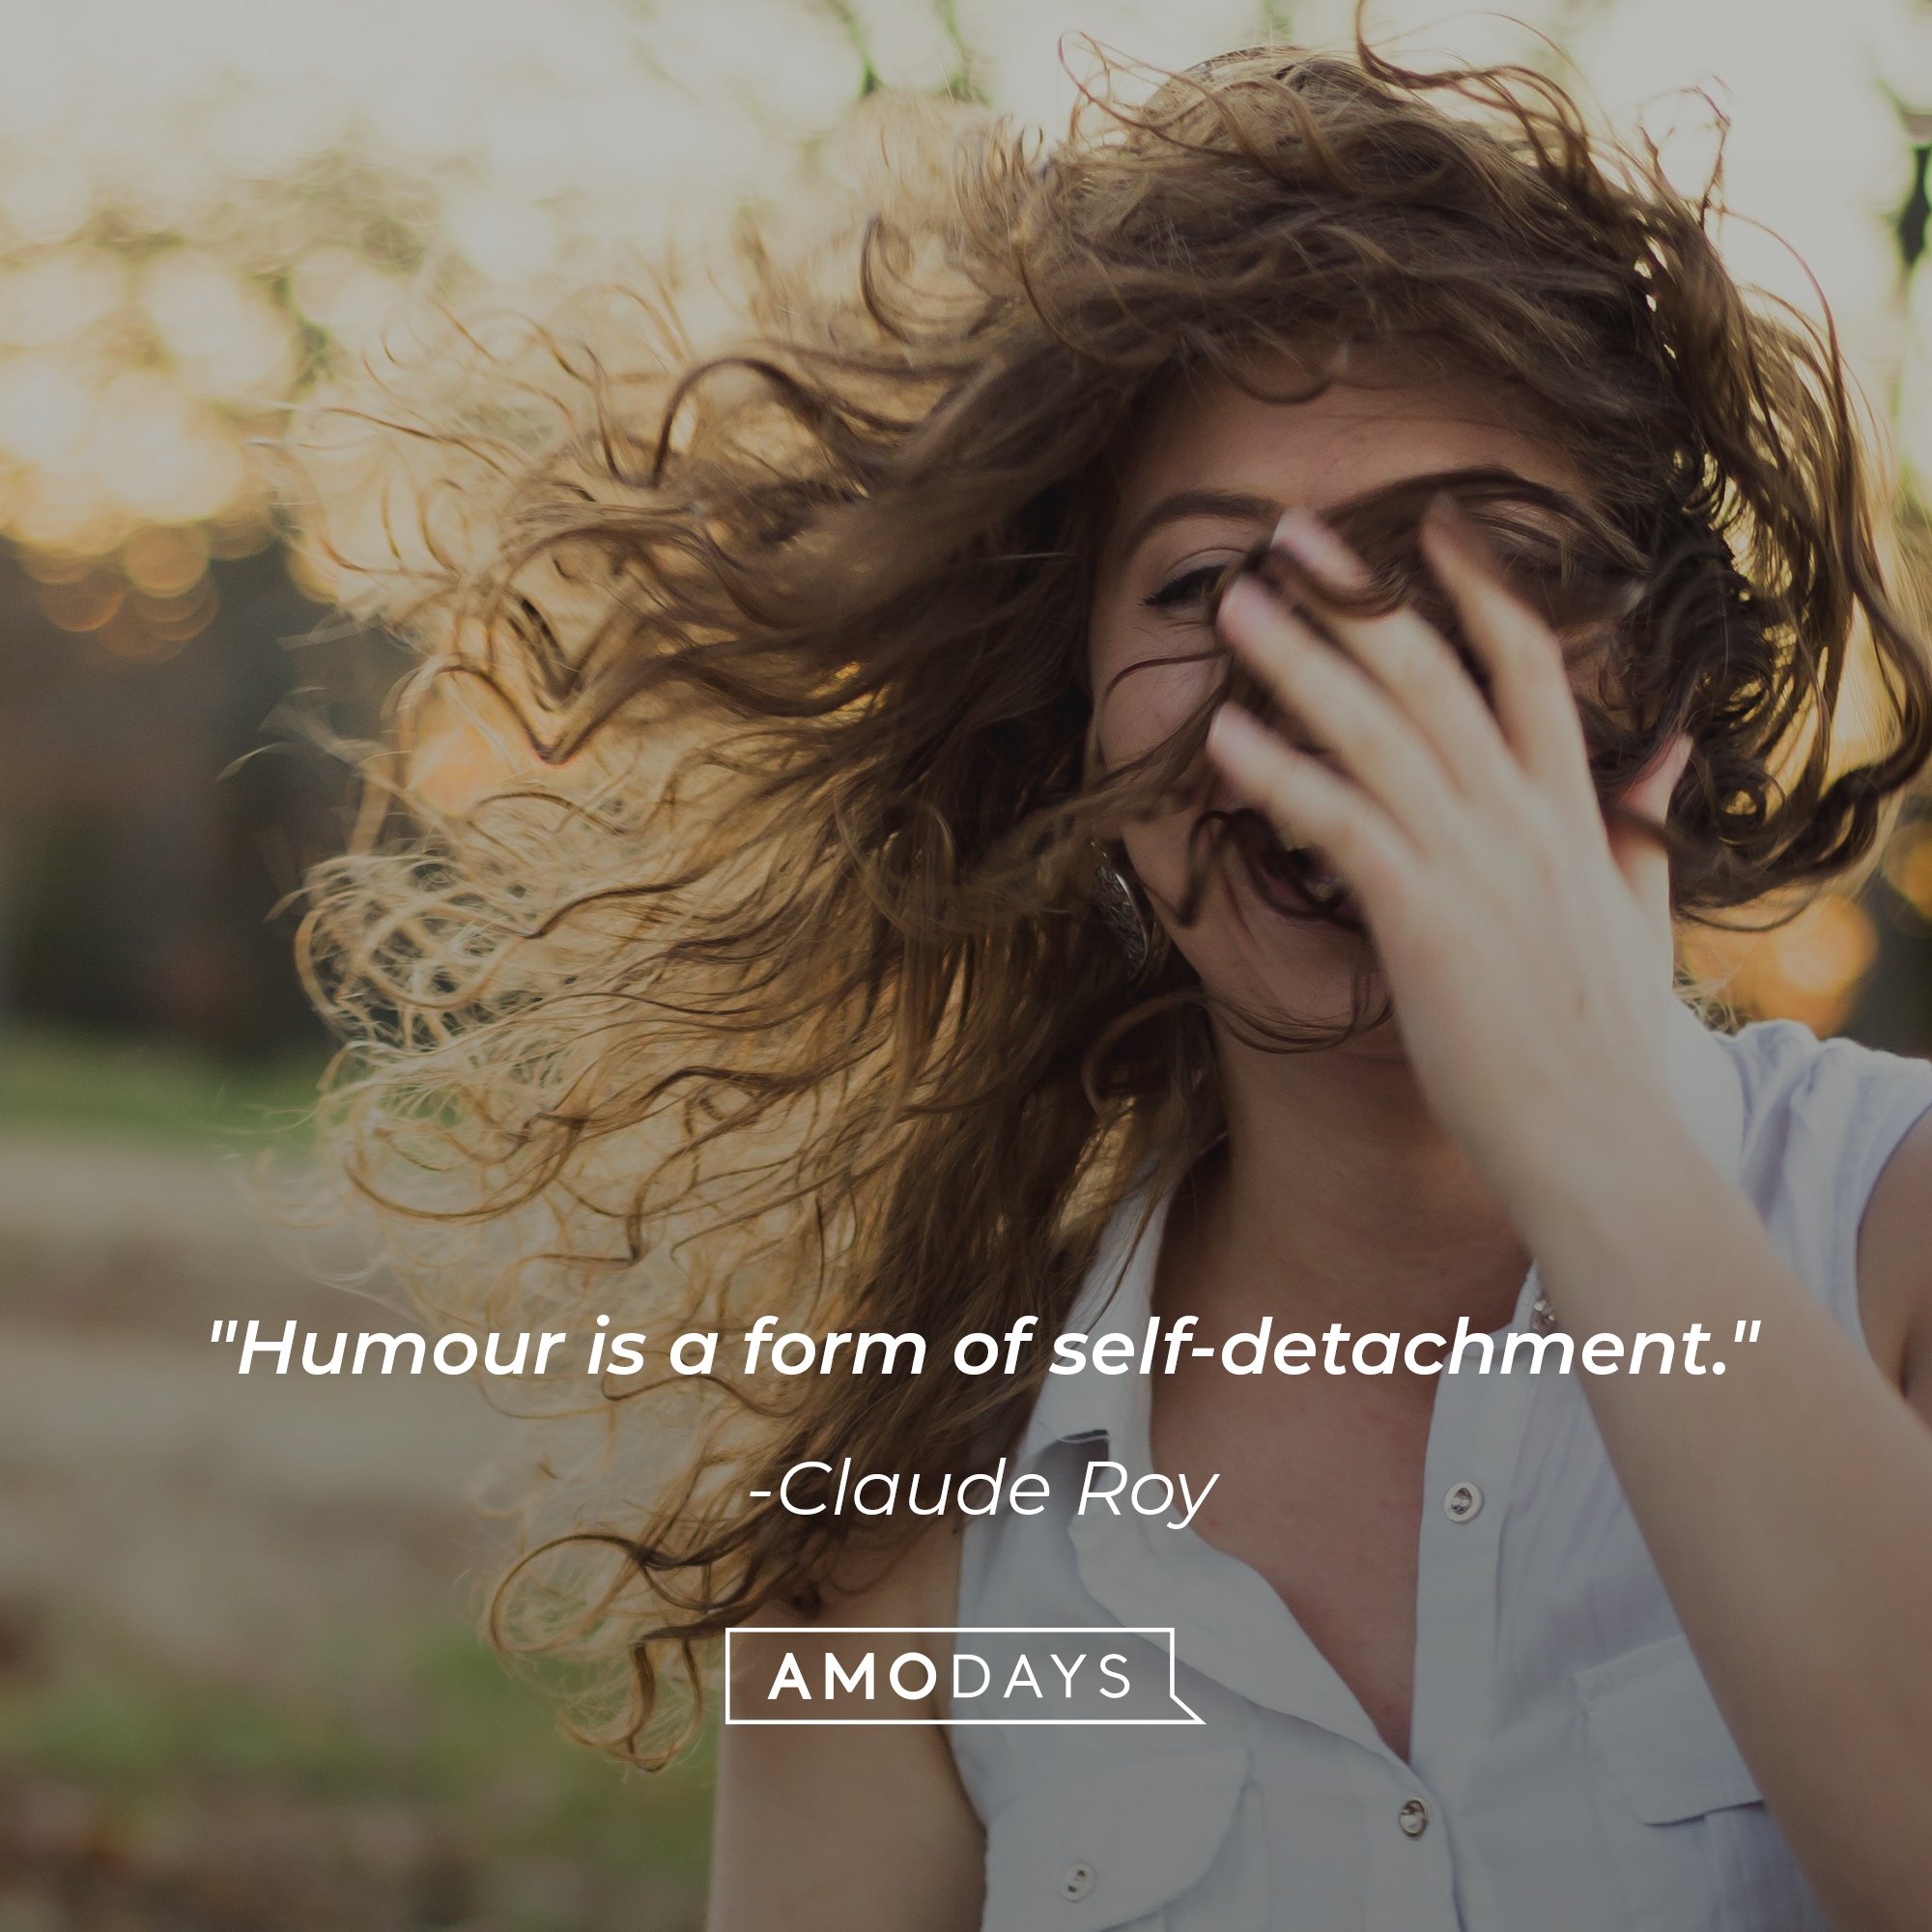 Claude Roy's quote: "Humour is a form of self-detachment." | Image: AmoDays